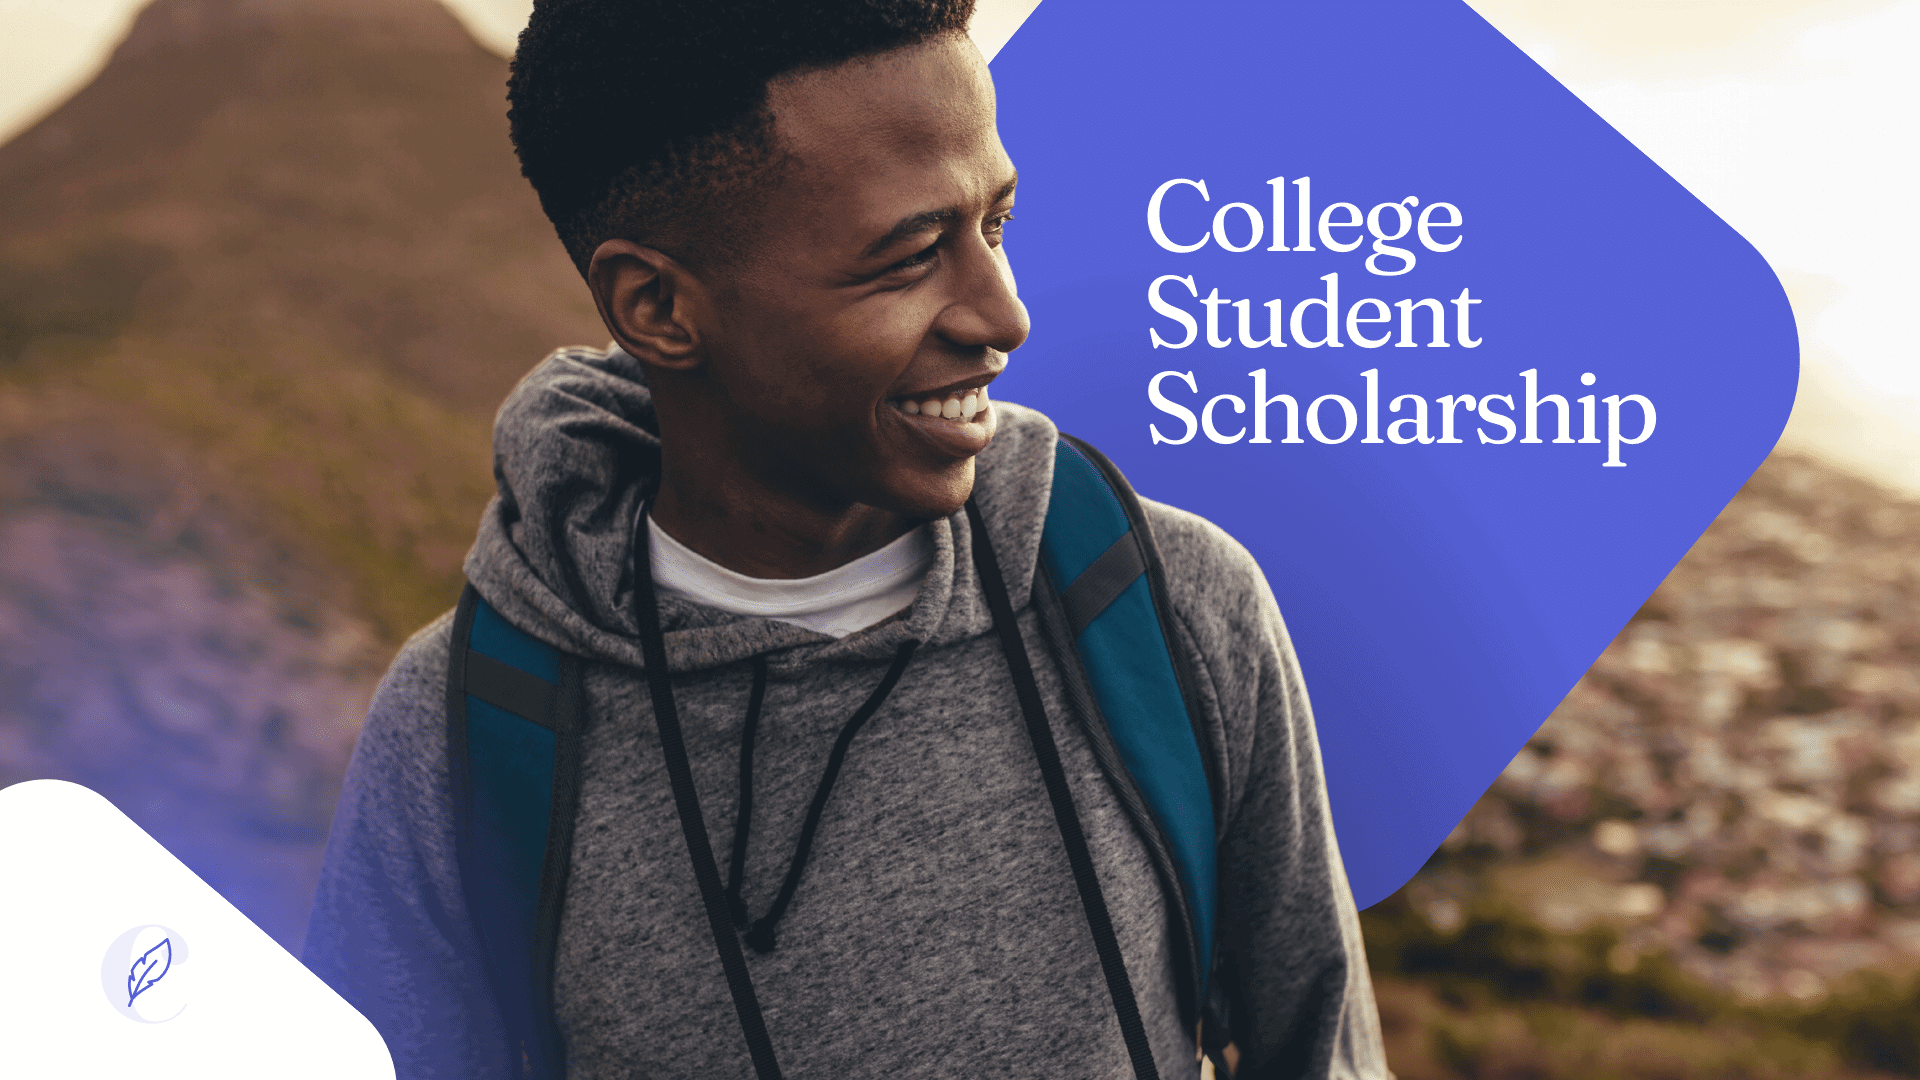 The CatholicAuthor Scholarship for College-enrolled Students: 1 full year FREE